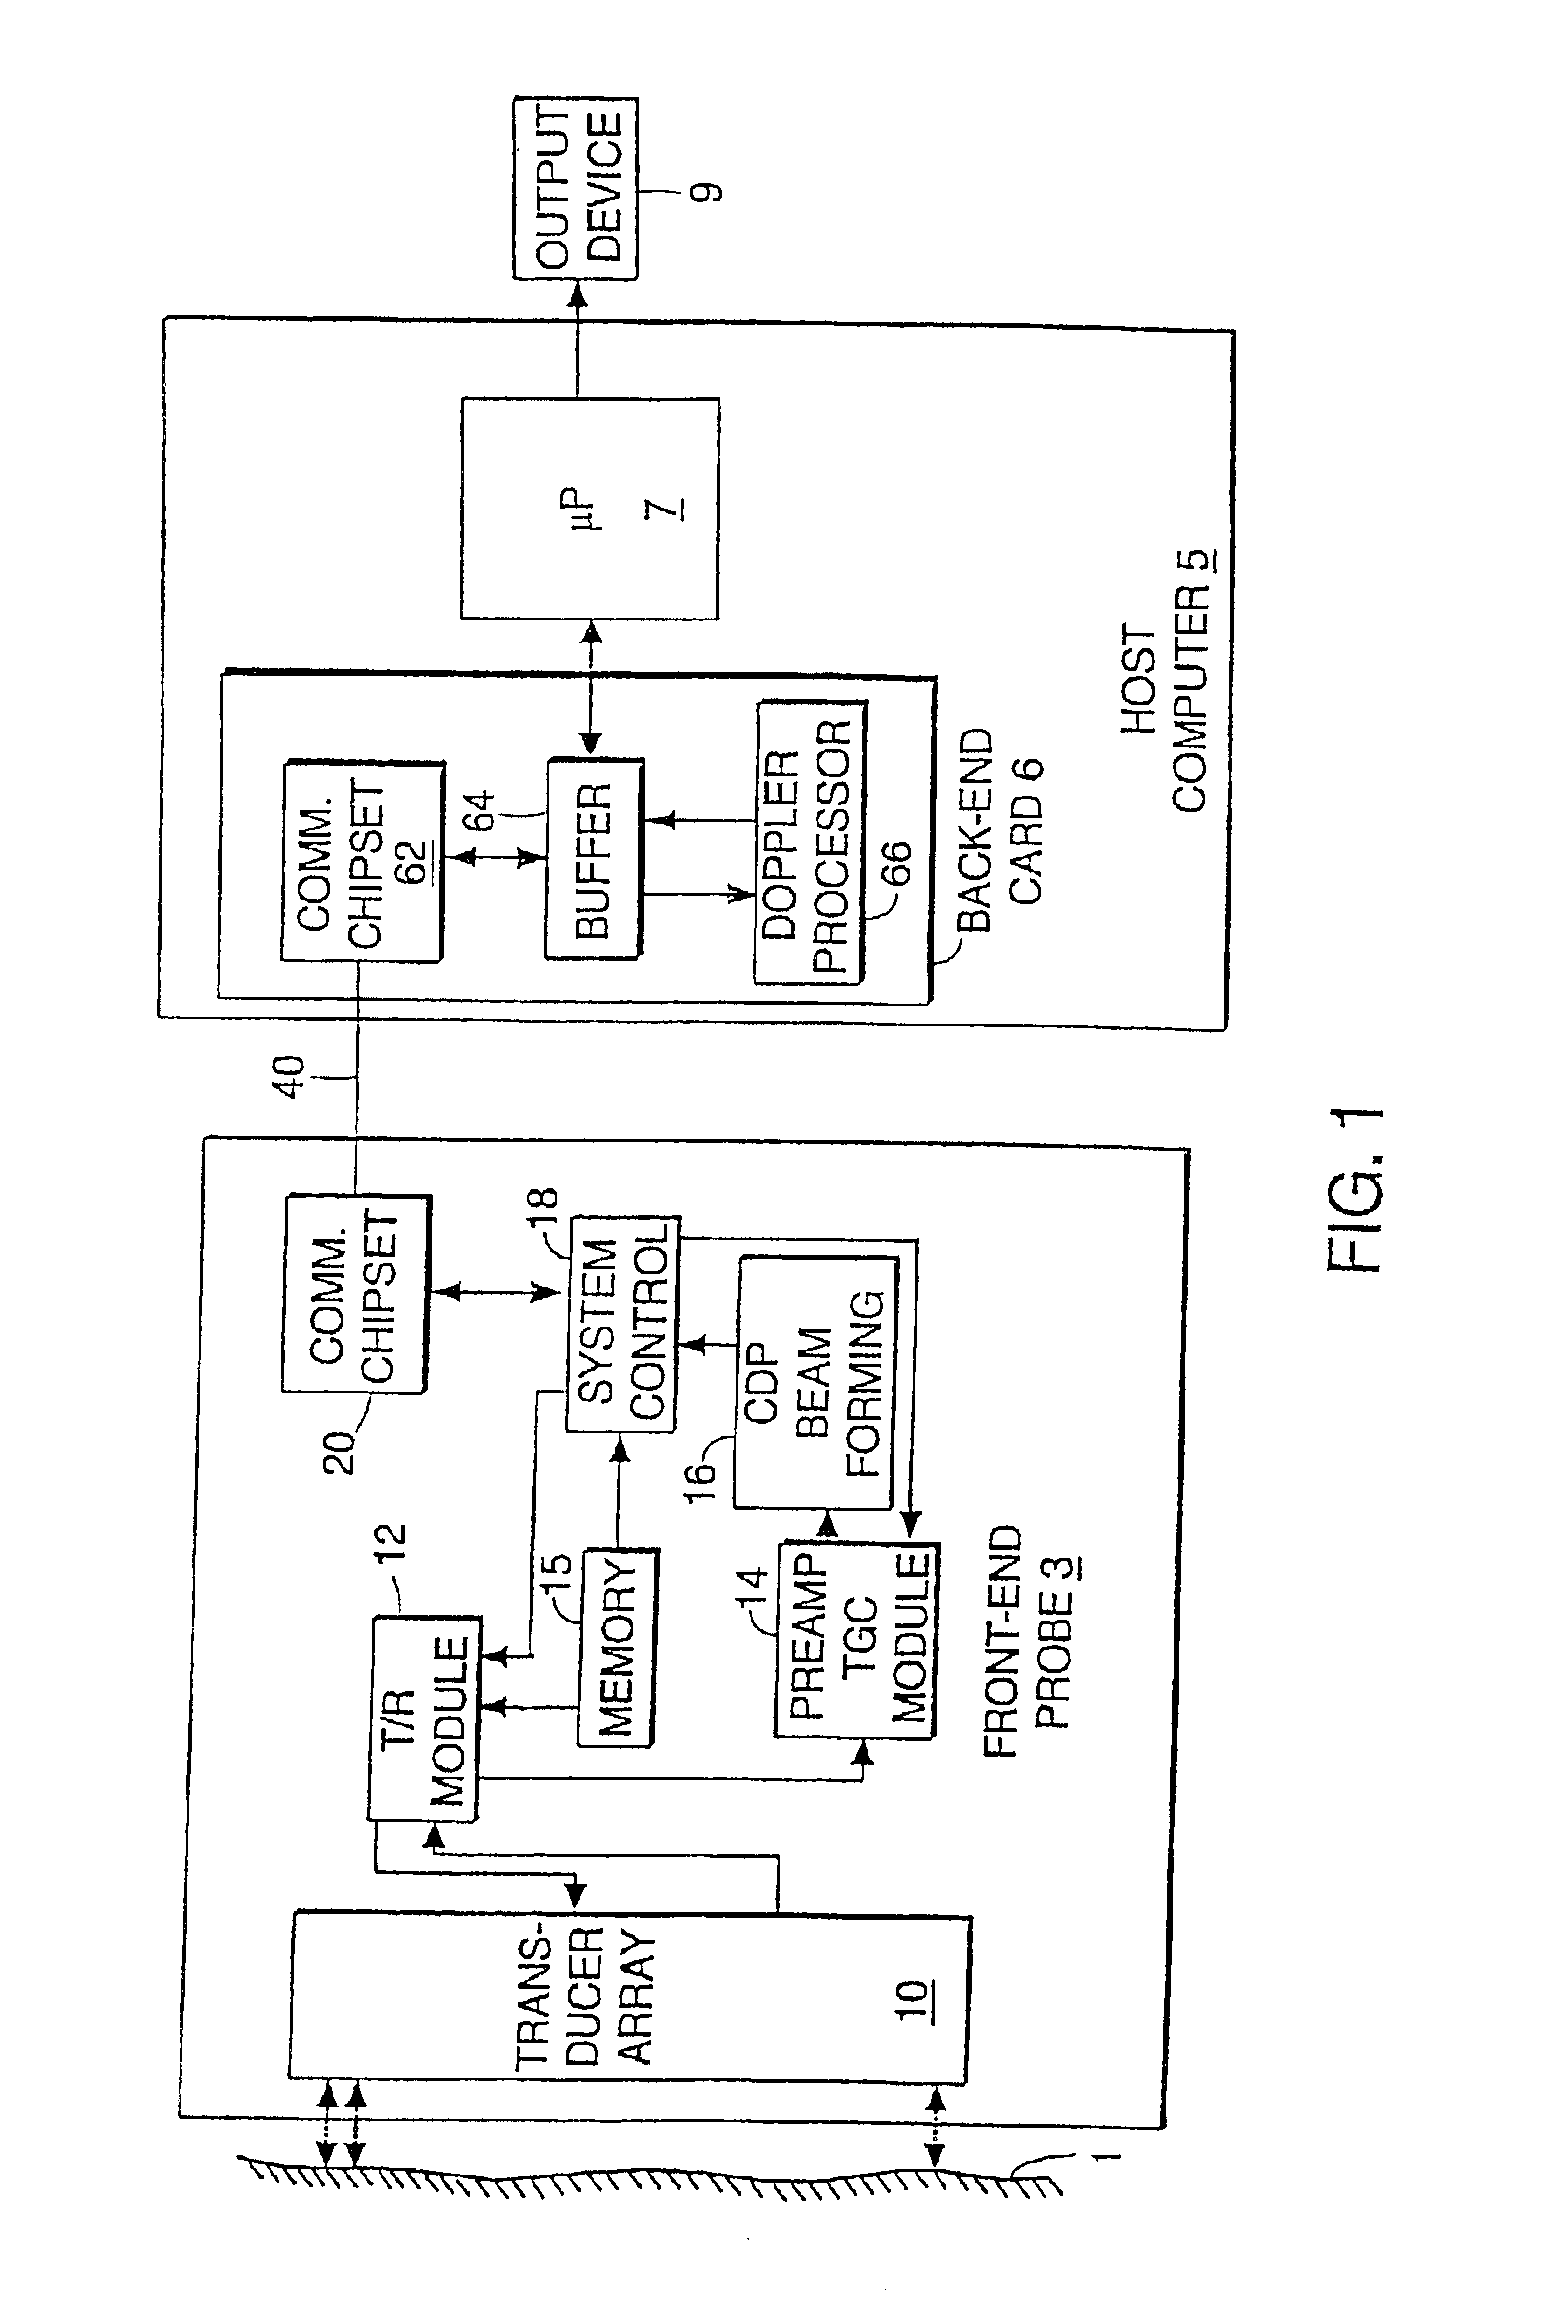 Ultrasound probe with integrated electronics